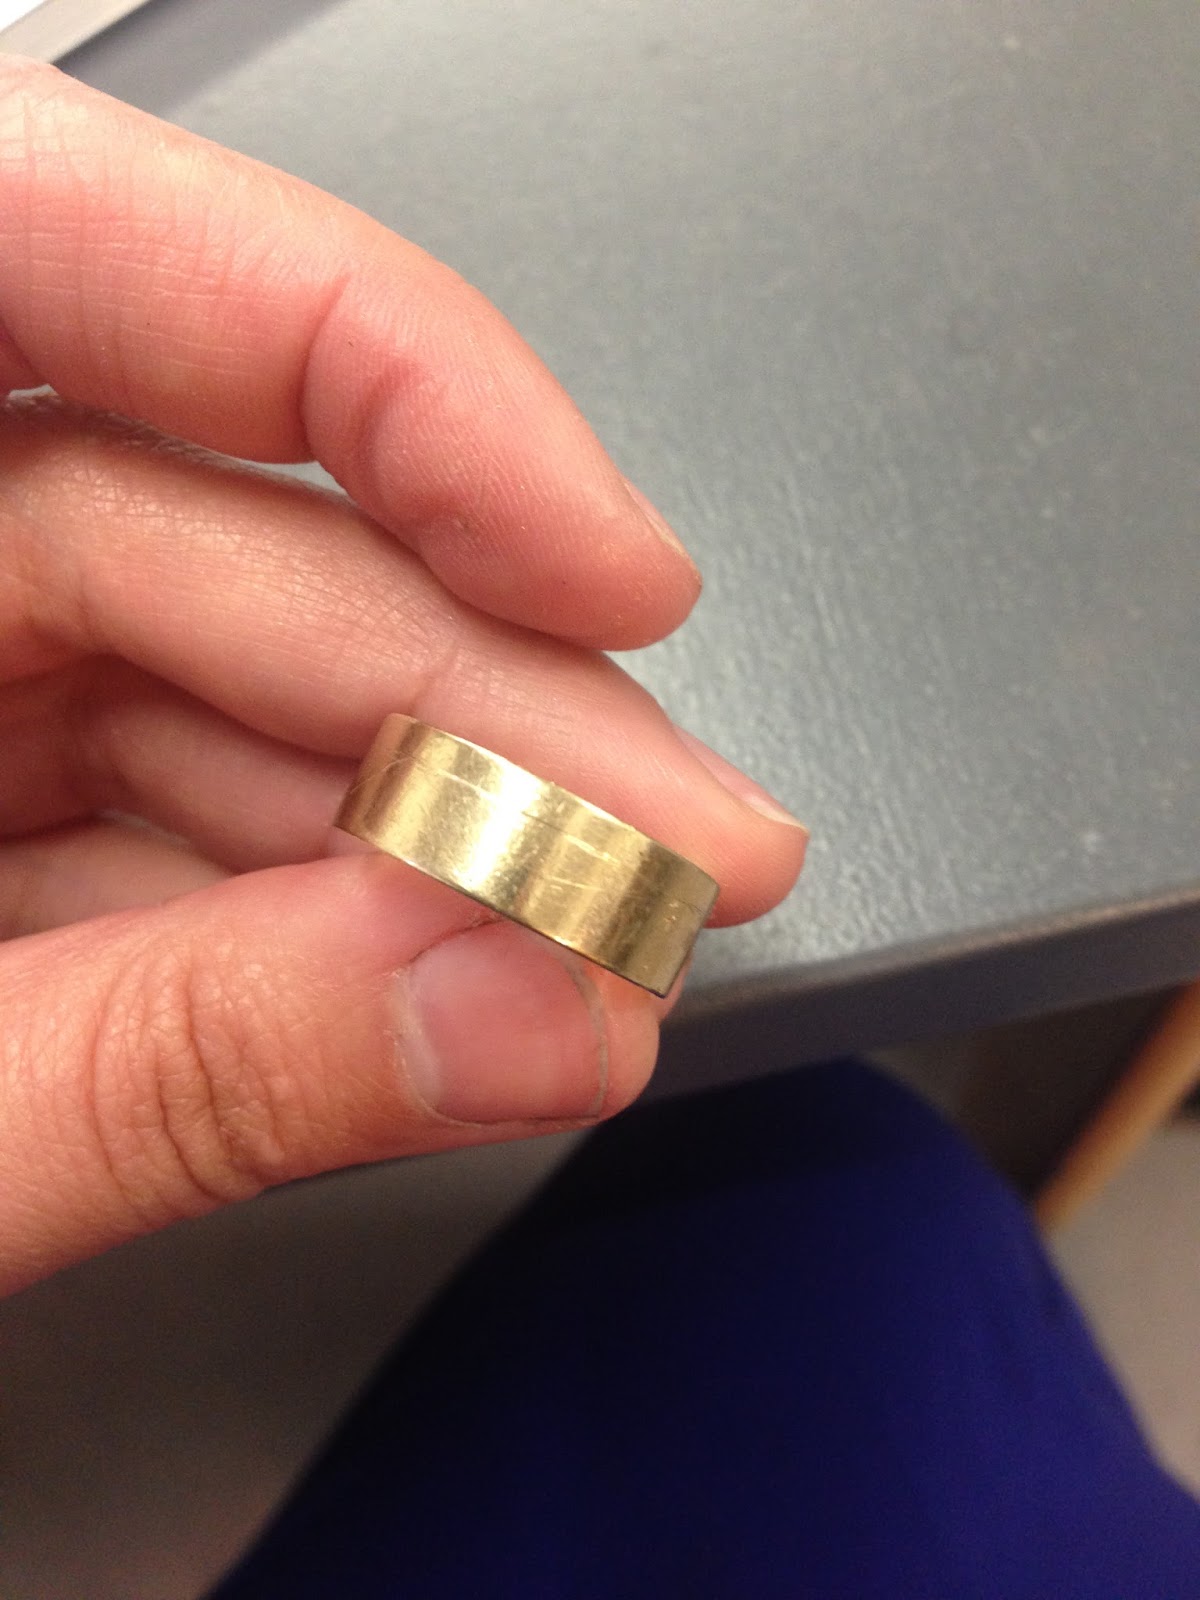 Getting wedding ring made smaller